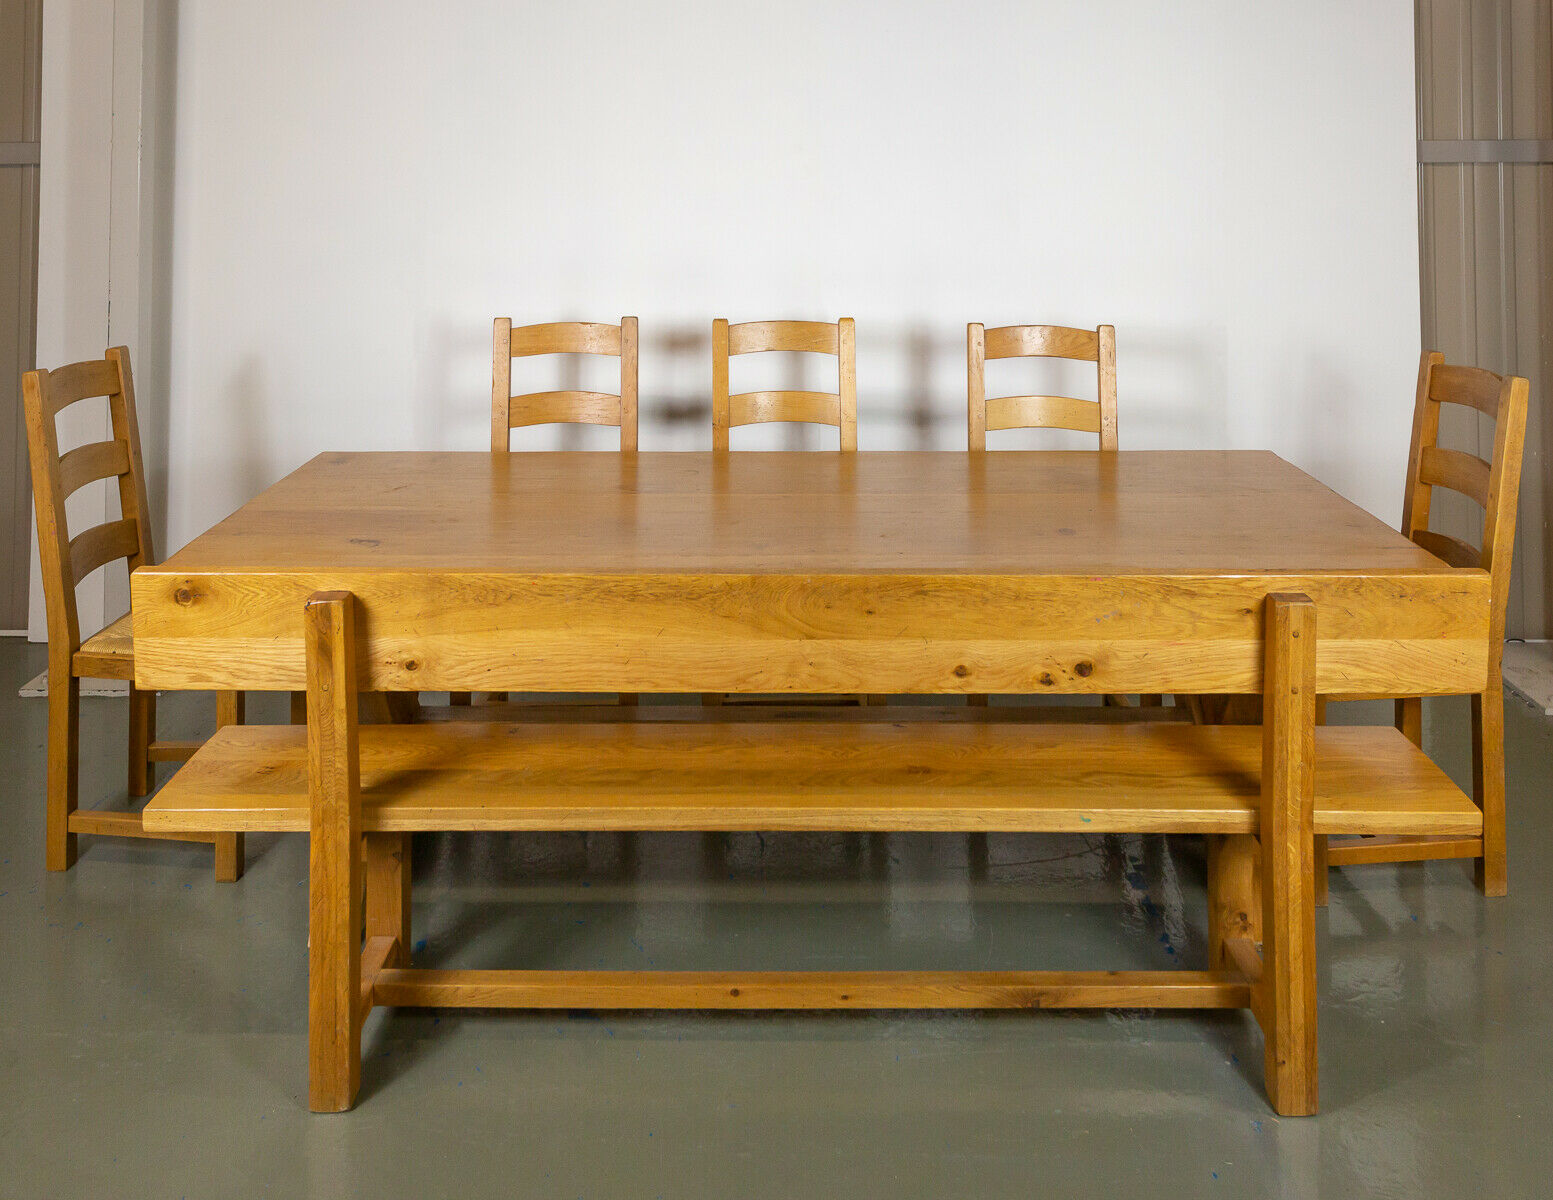 Rossiters of Bath Solid Wood Table, Chairs and Bench